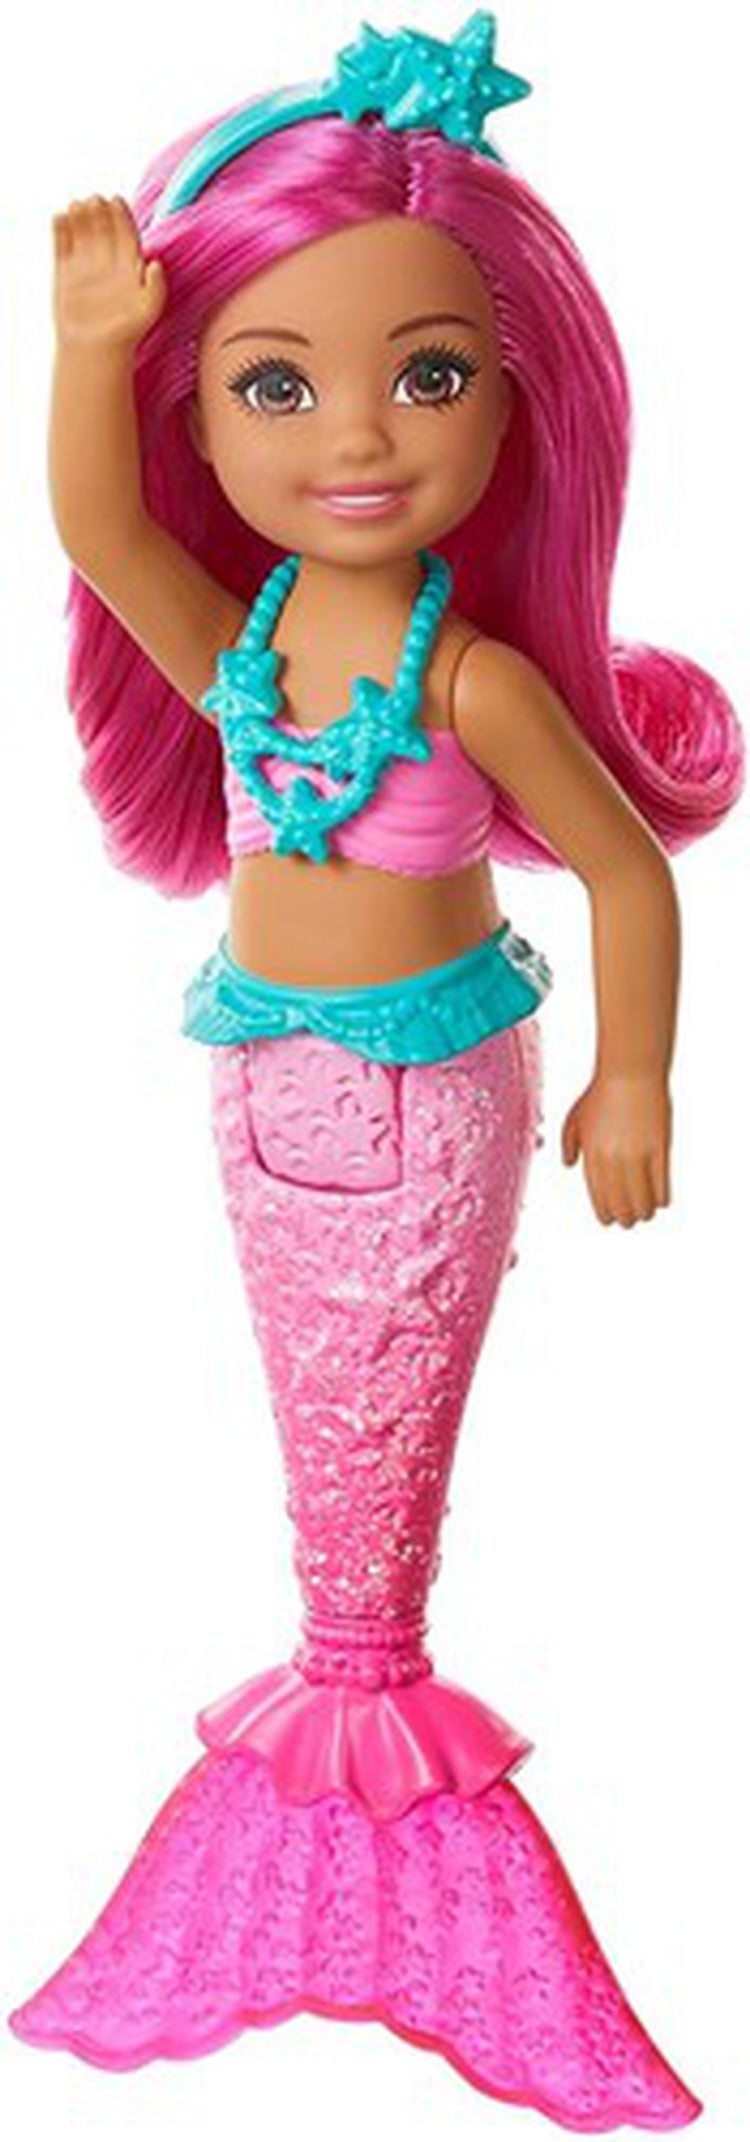 Mattel - Barbie Dreamtopia: Chelsea Mermaid Doll with Pink Hair and Tail